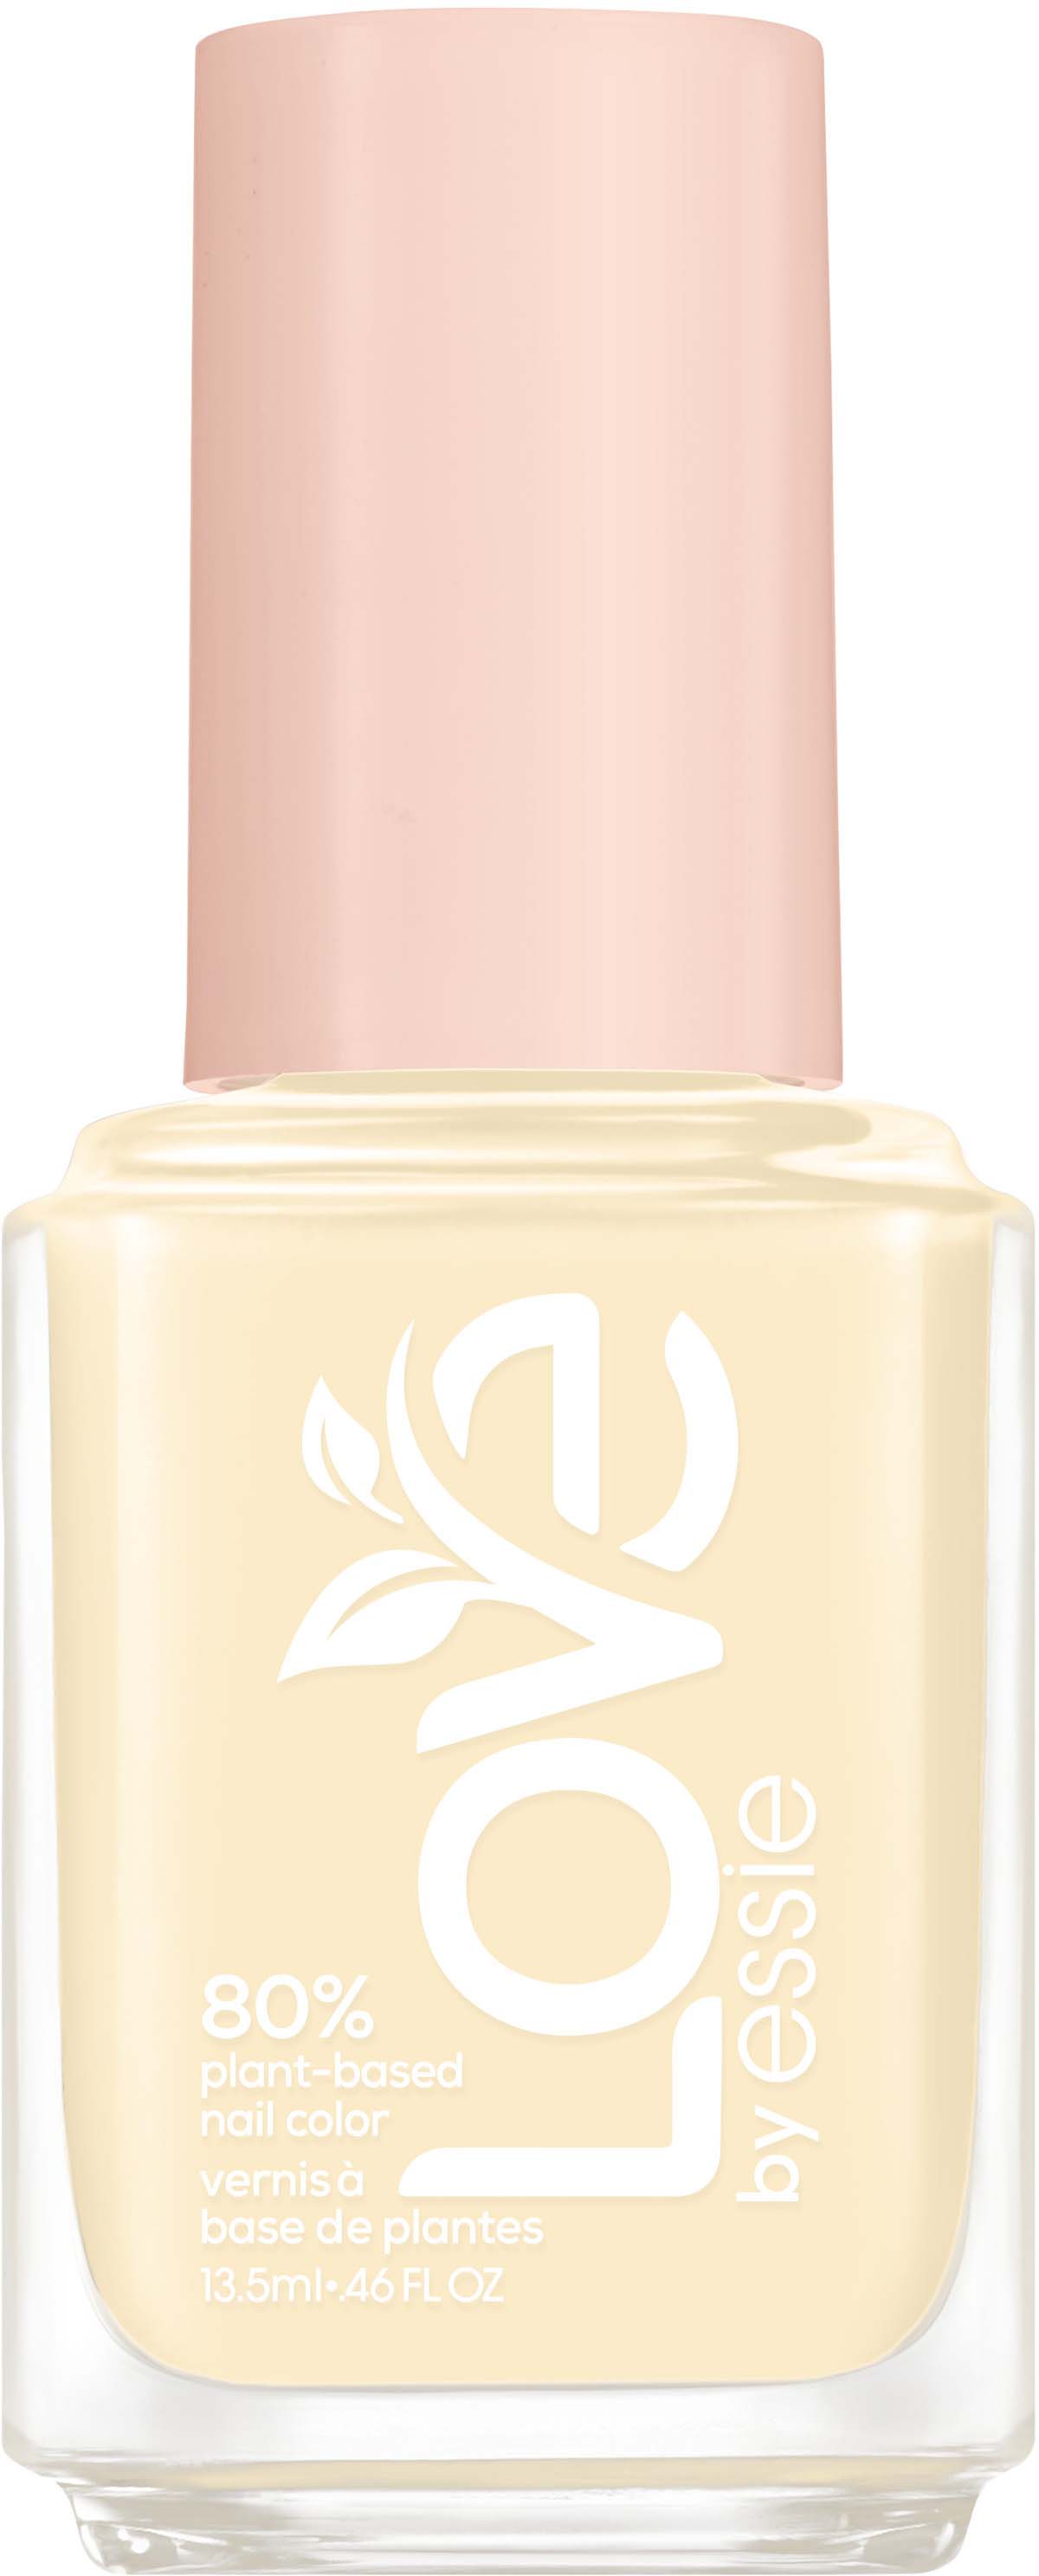 Essie LOVE by Essie Brighter The 230 Color On Nail Side Plant-based 80